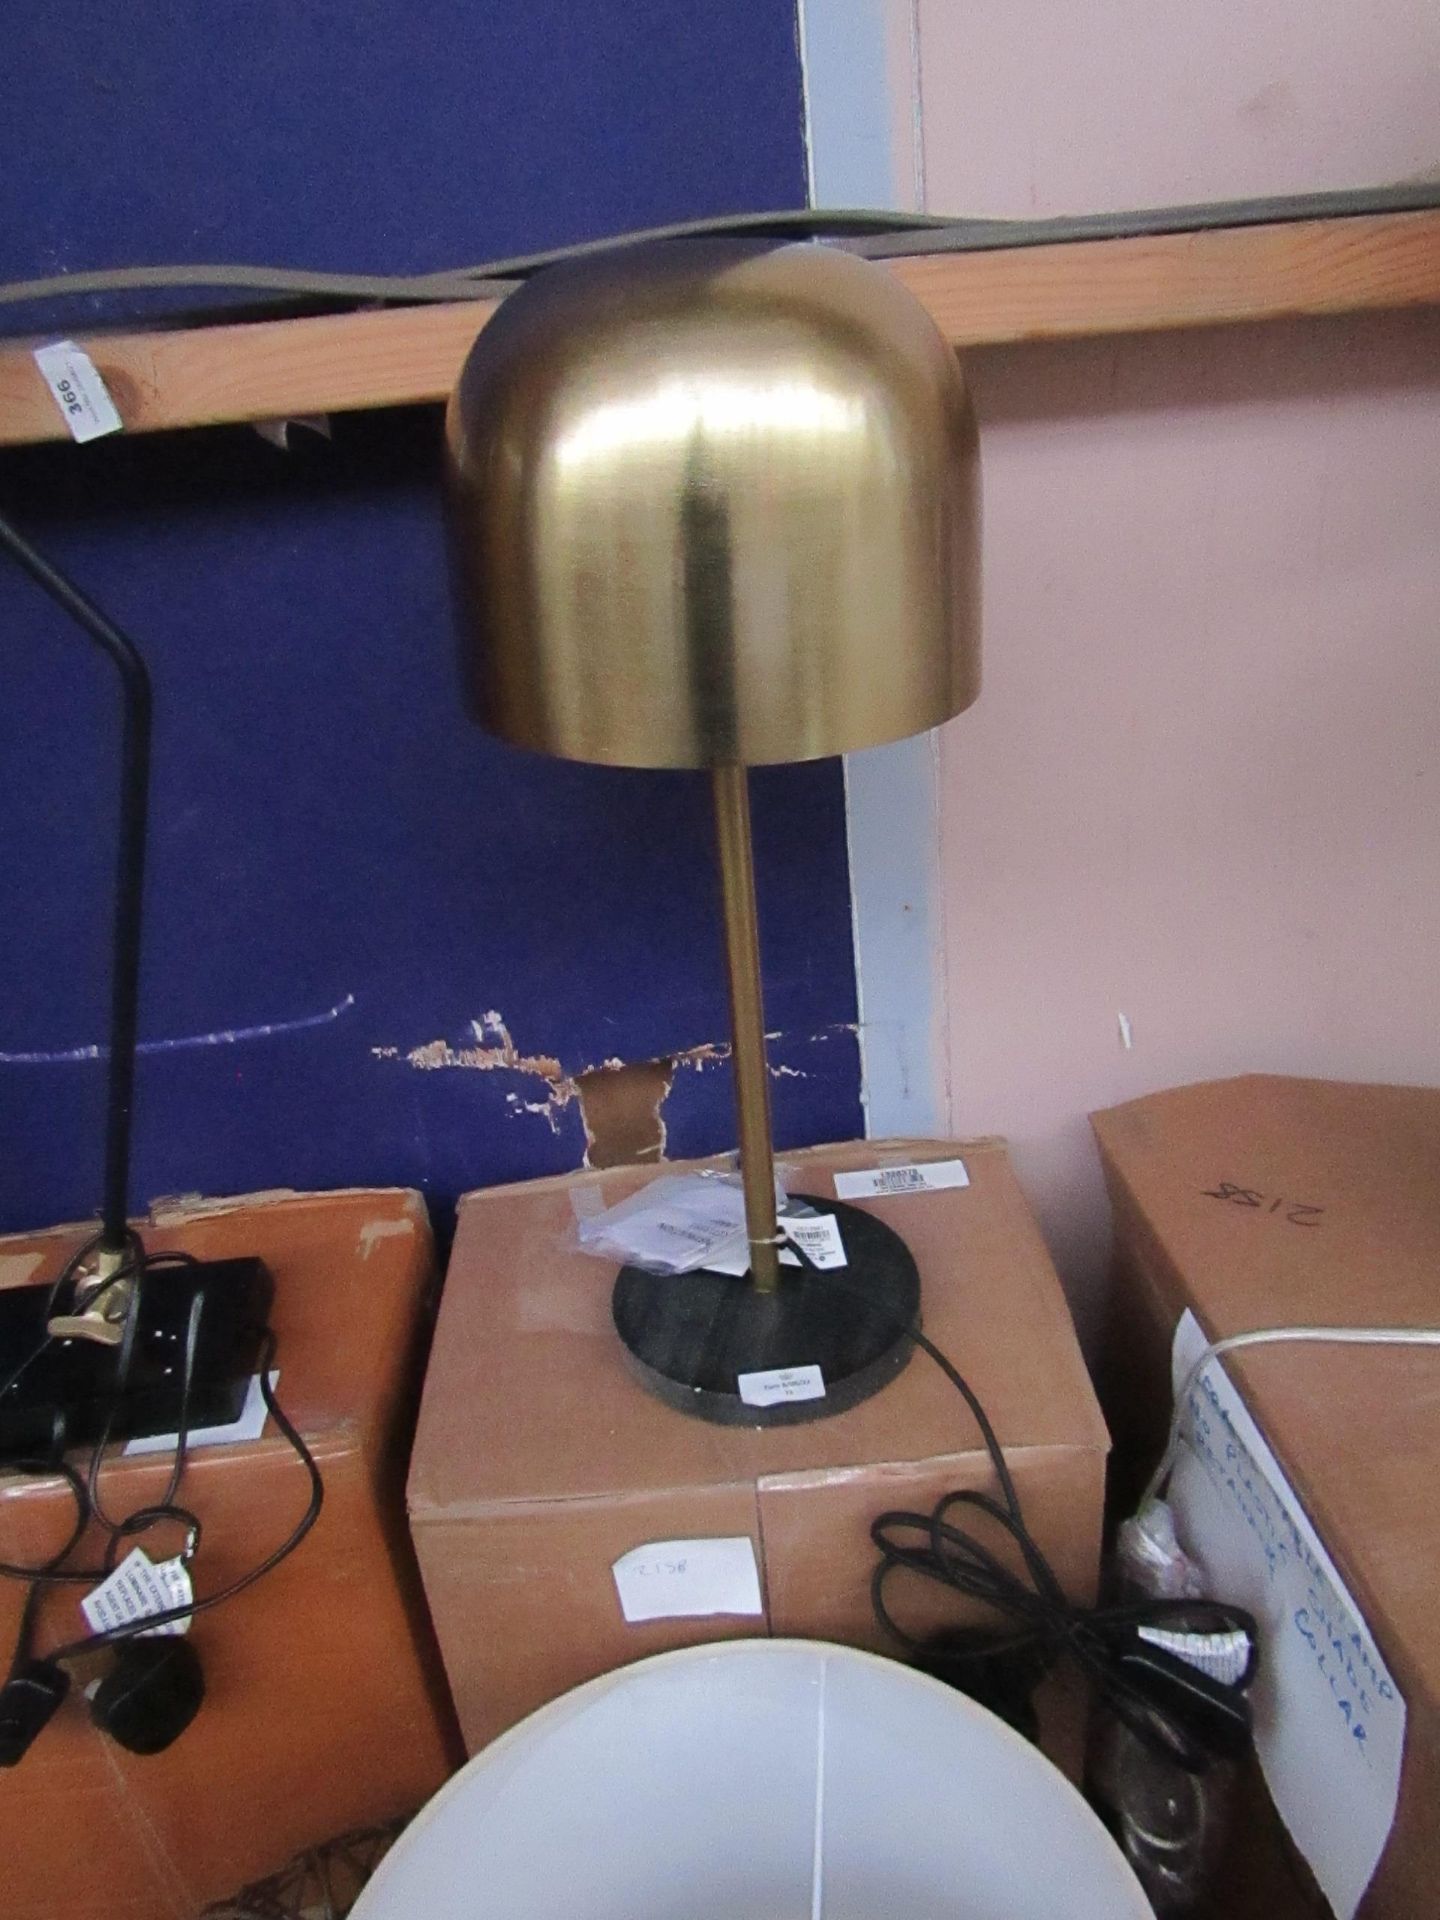 1 x Cox & Cox Gold & Marble Table Lamp RRP £95.00 SKU COX-AP-1328378 TOTAL RRP £95 This lot is a